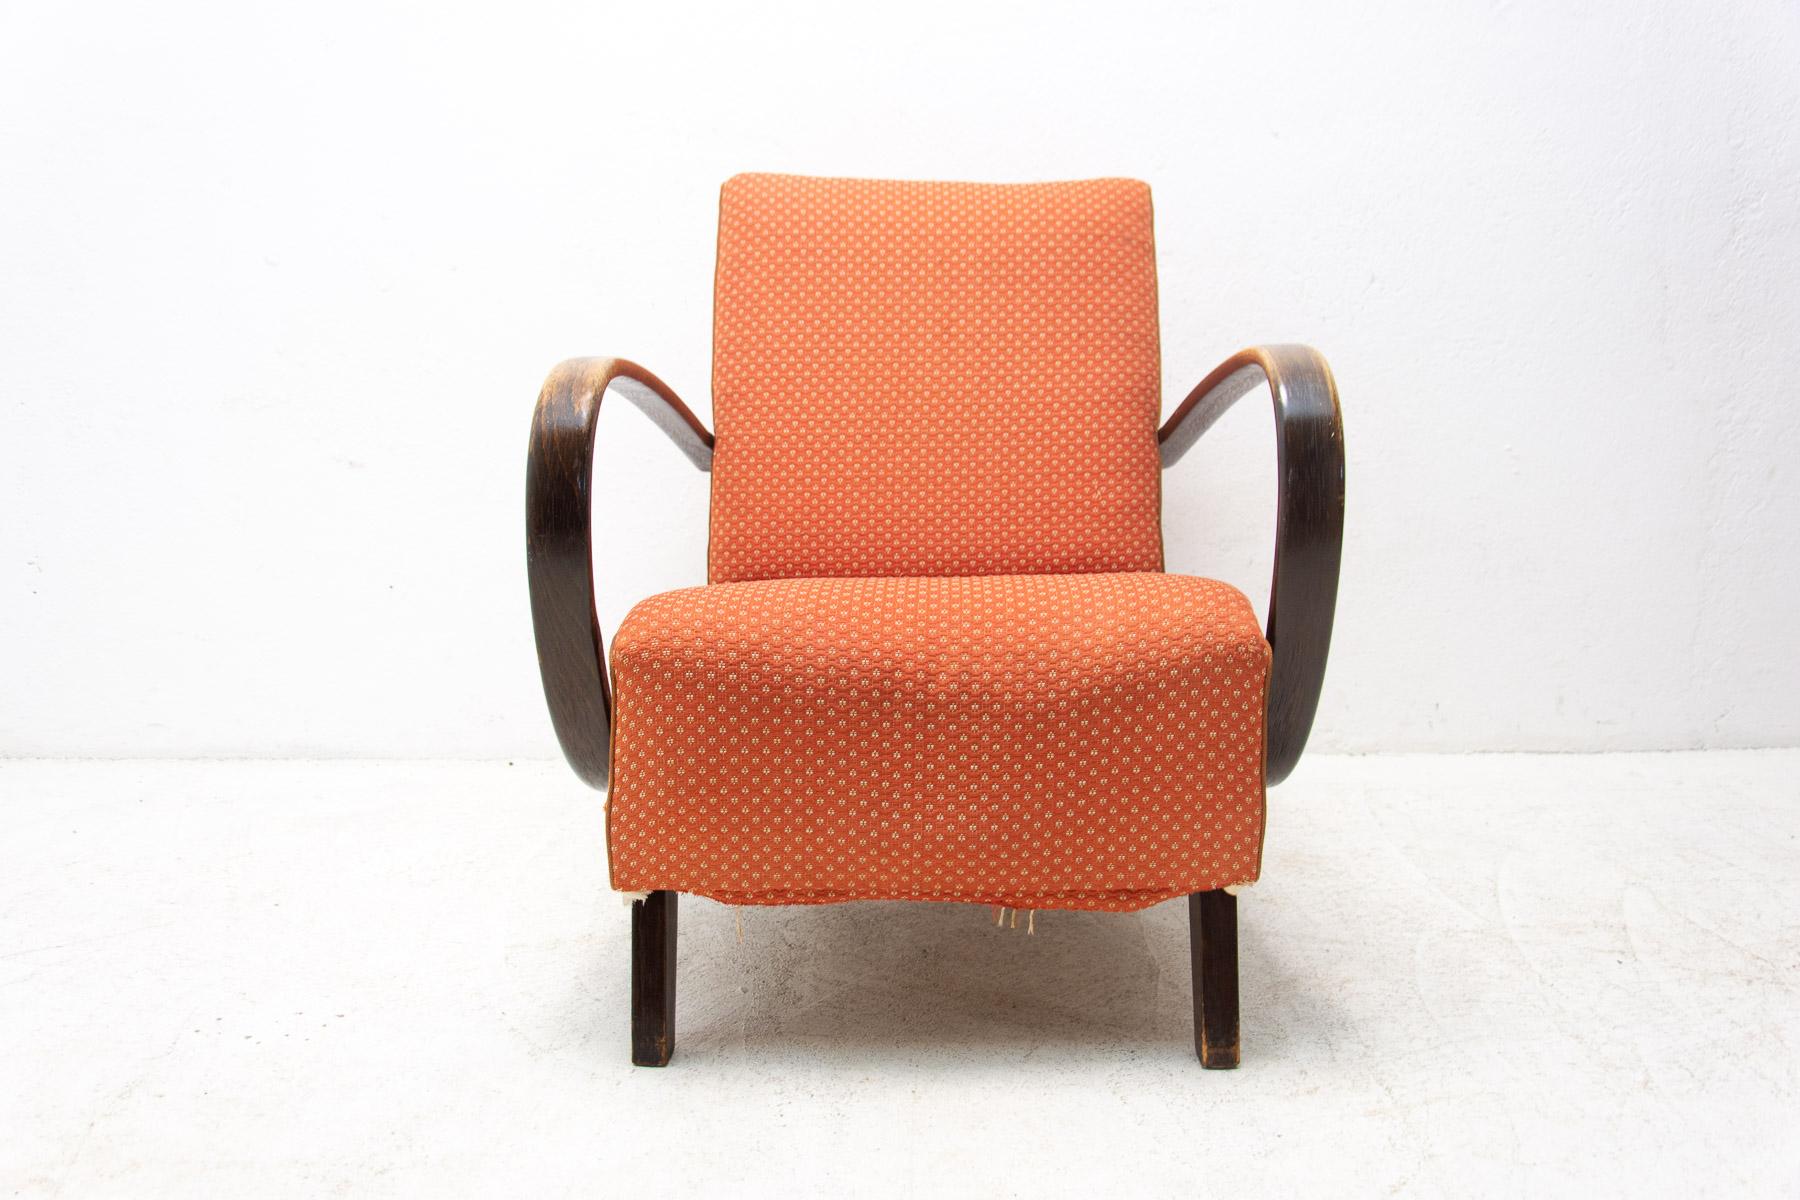 This bentwood “C” armchair was designed by Jindrich Halabala and produced by UP Závody in the 1950´s. The chair is stable and comfortable and is in good structure condition. The fabric showing signs of age and wear. Look at the